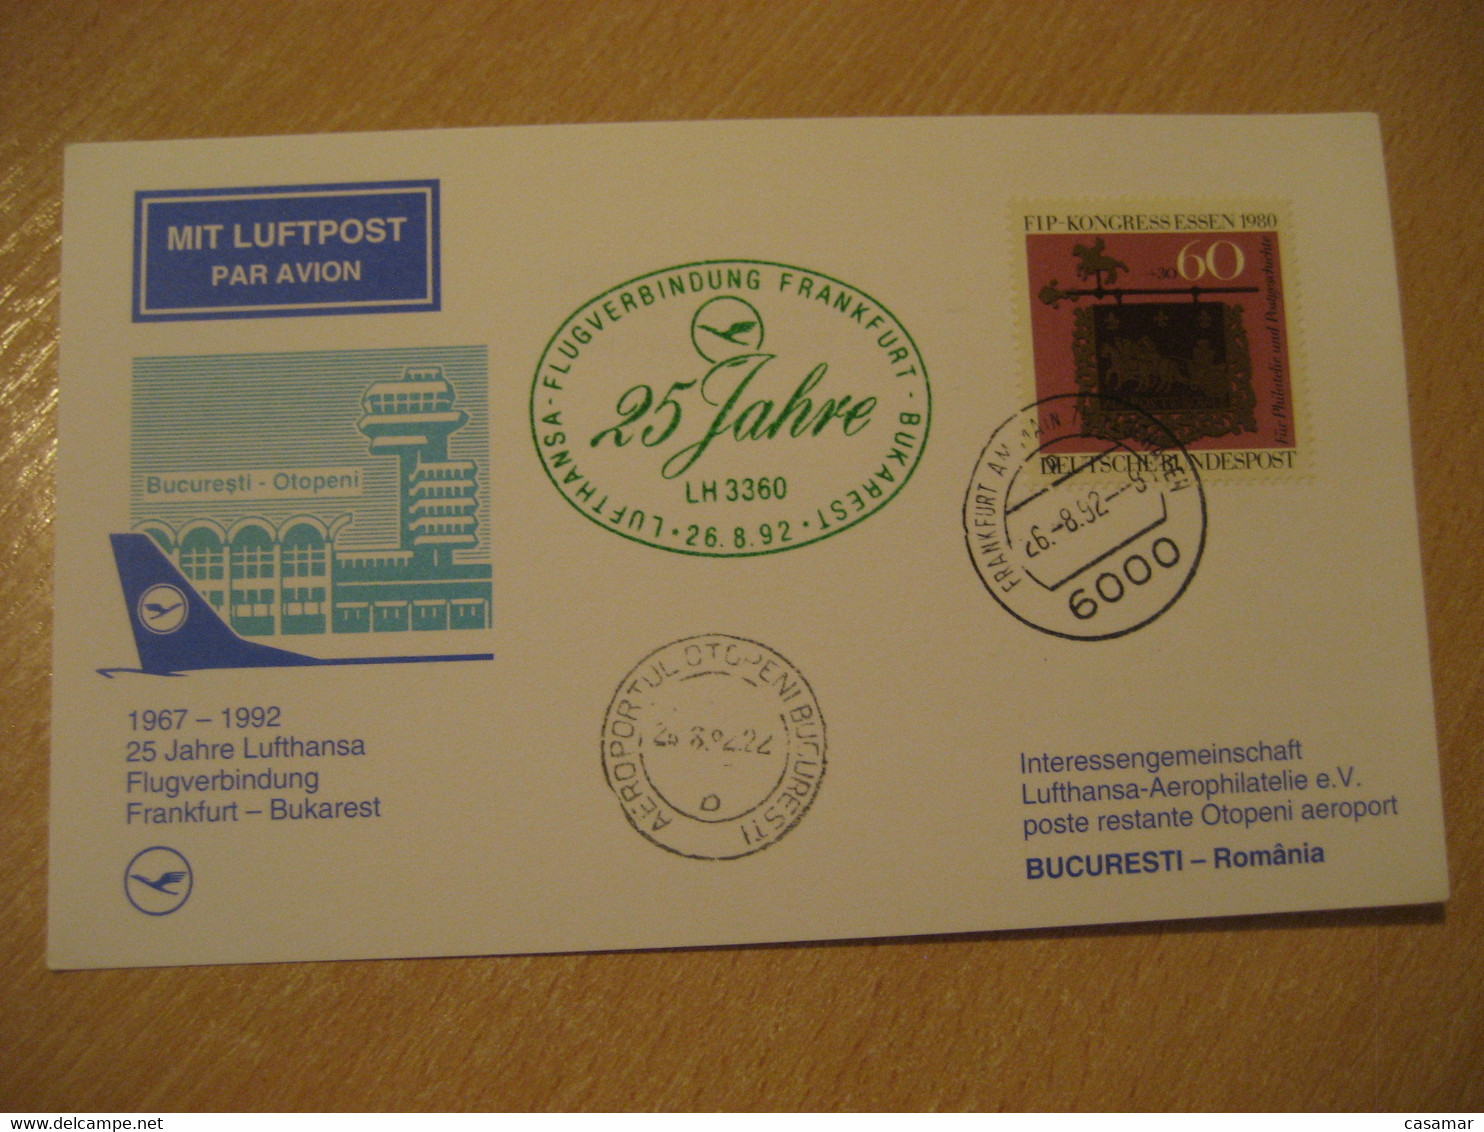 BUCHAREST Frankfurt 1992 Lufthansa Airlines Airline 25 Year First Flight Green Cancel Card ROMANIA GERMANY - Covers & Documents